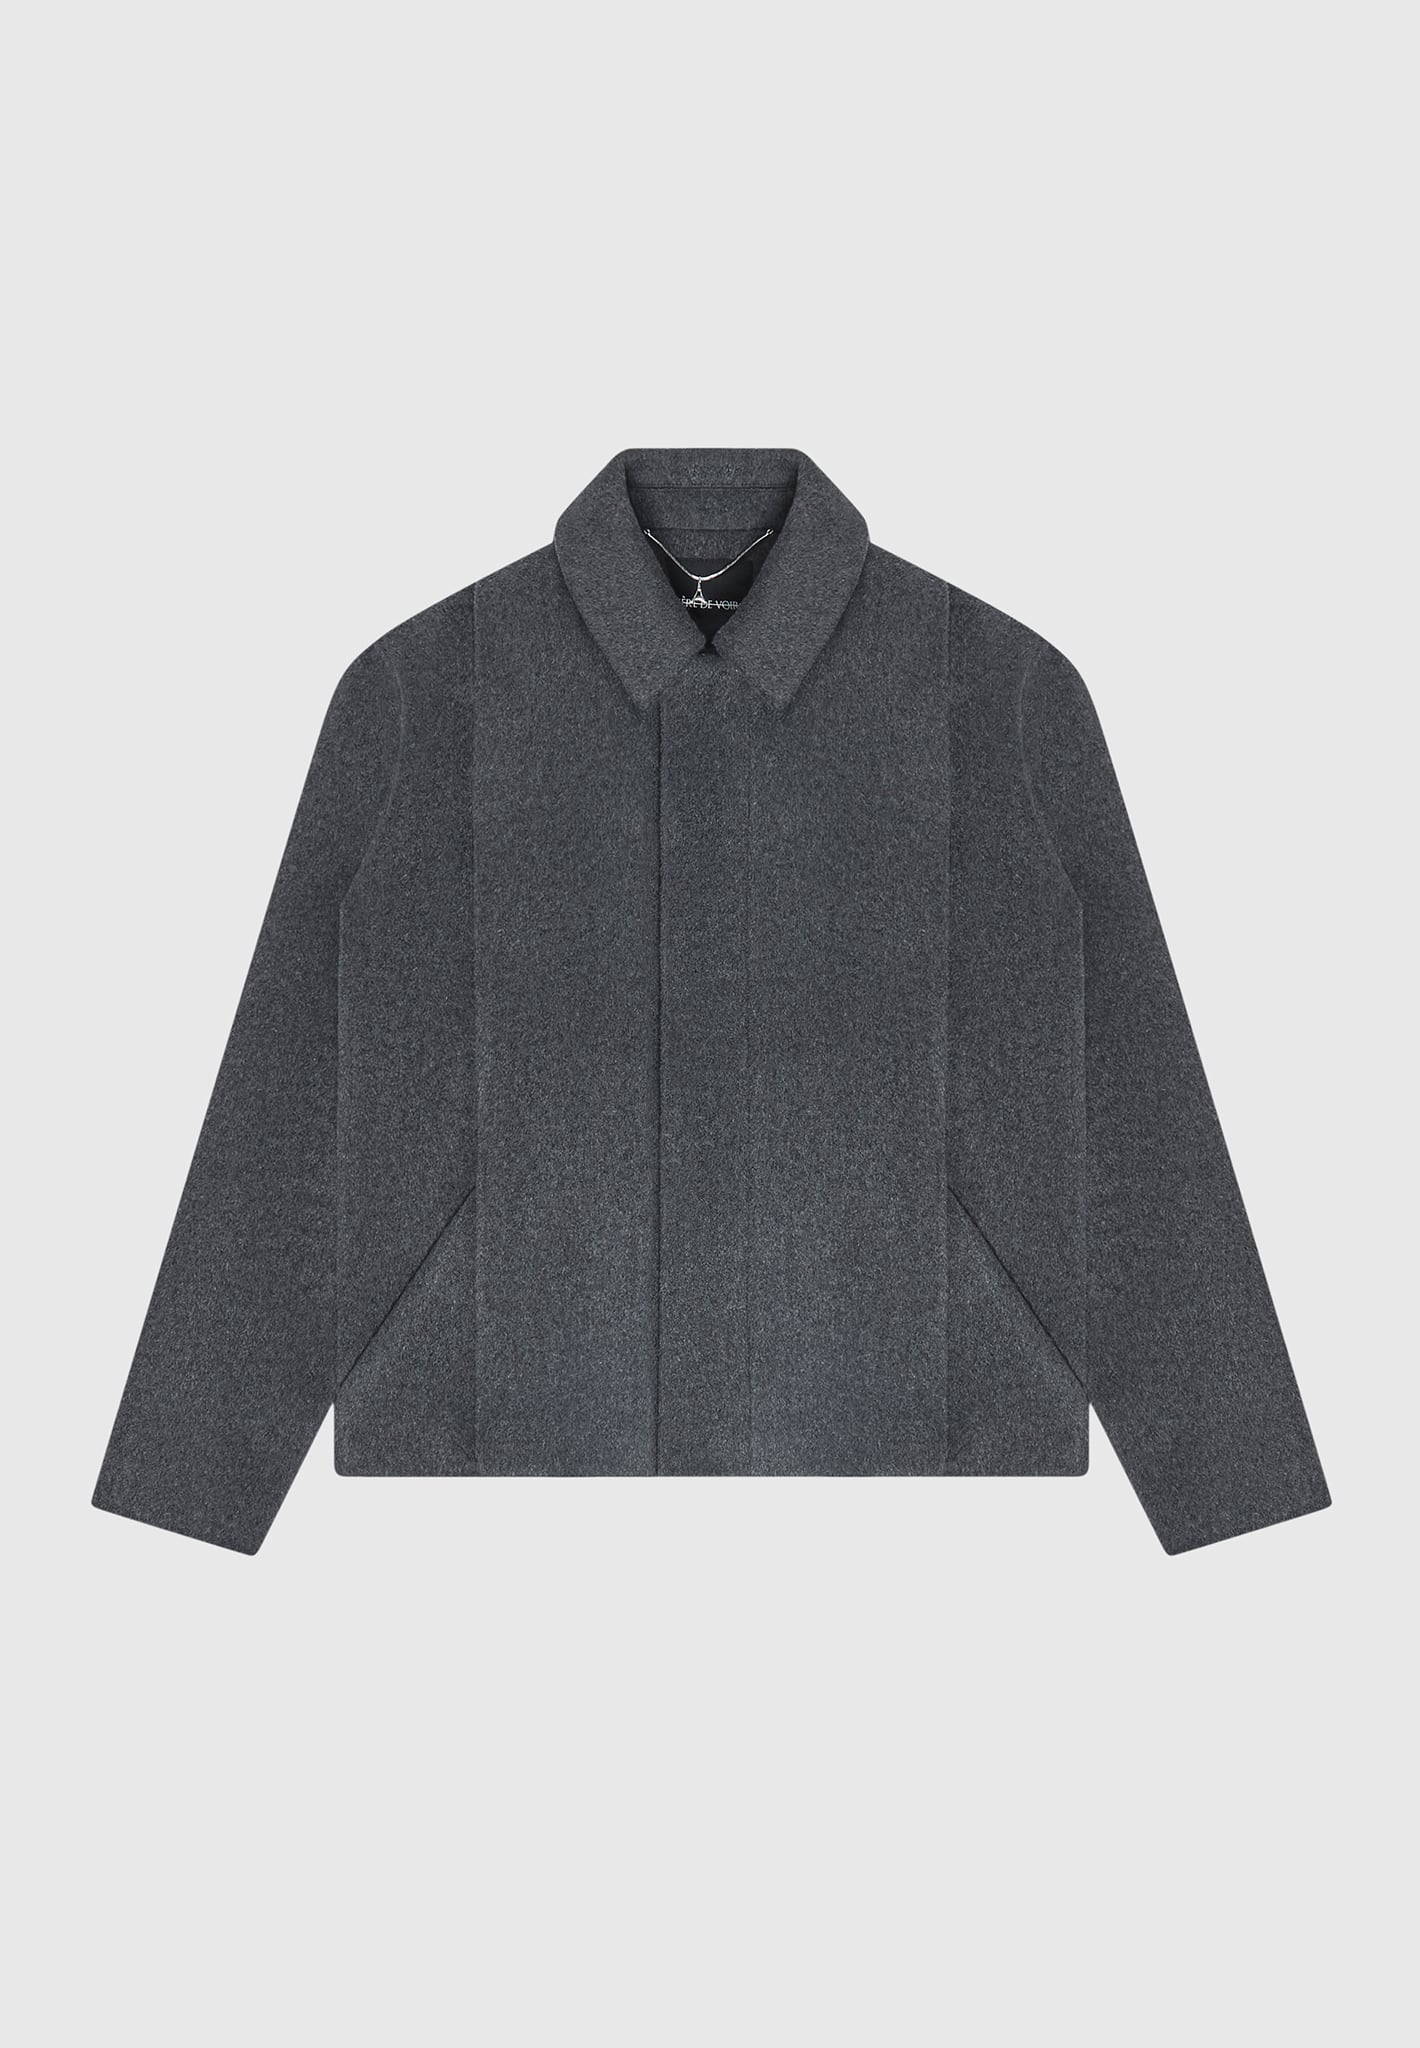 wool-blend-boxy-jacket-with-pleat-charcoal-grey